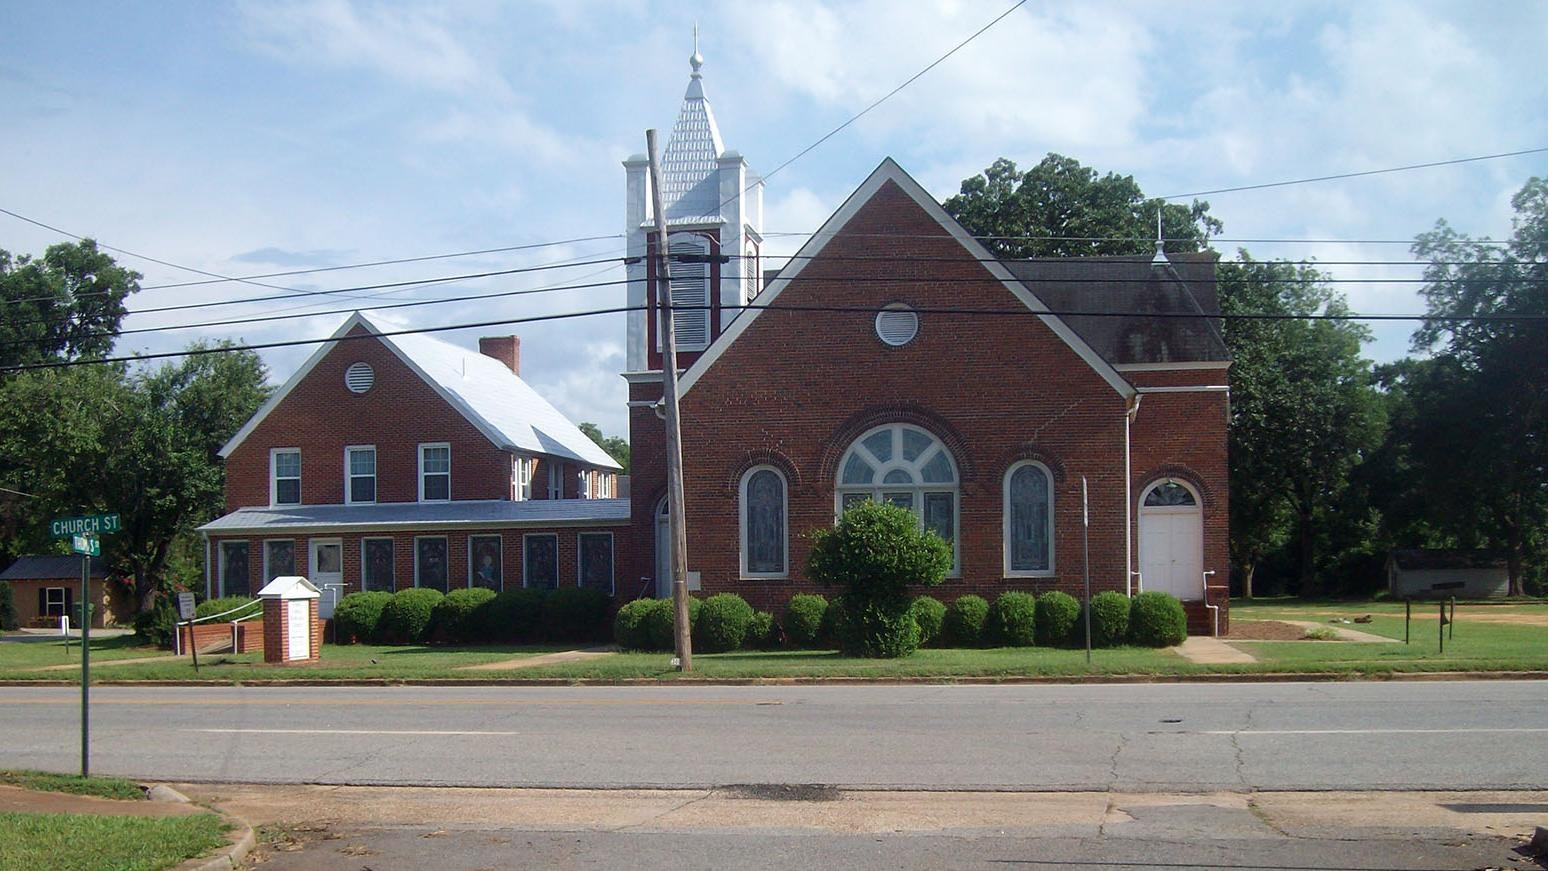 Plains United Methodist Church is a one story red brick building with a large stained glass window